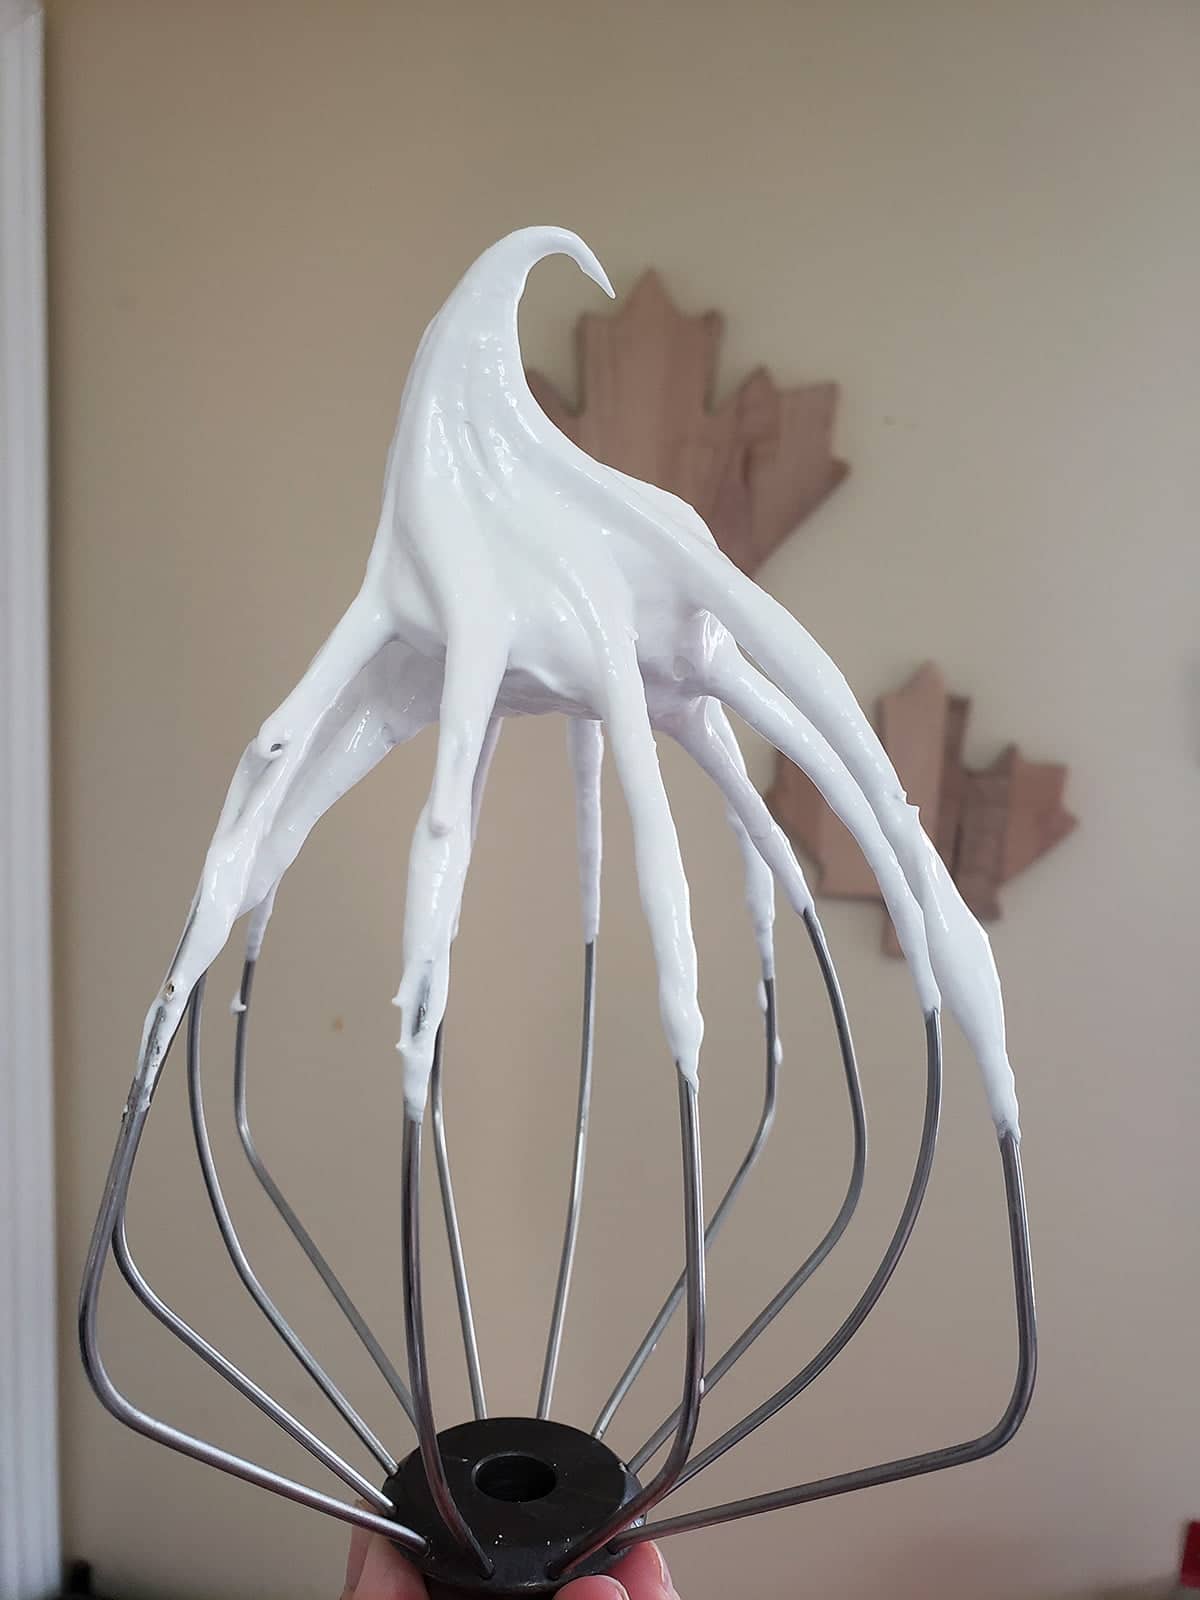 An inverted whisk with a soft peak of meringue on top.